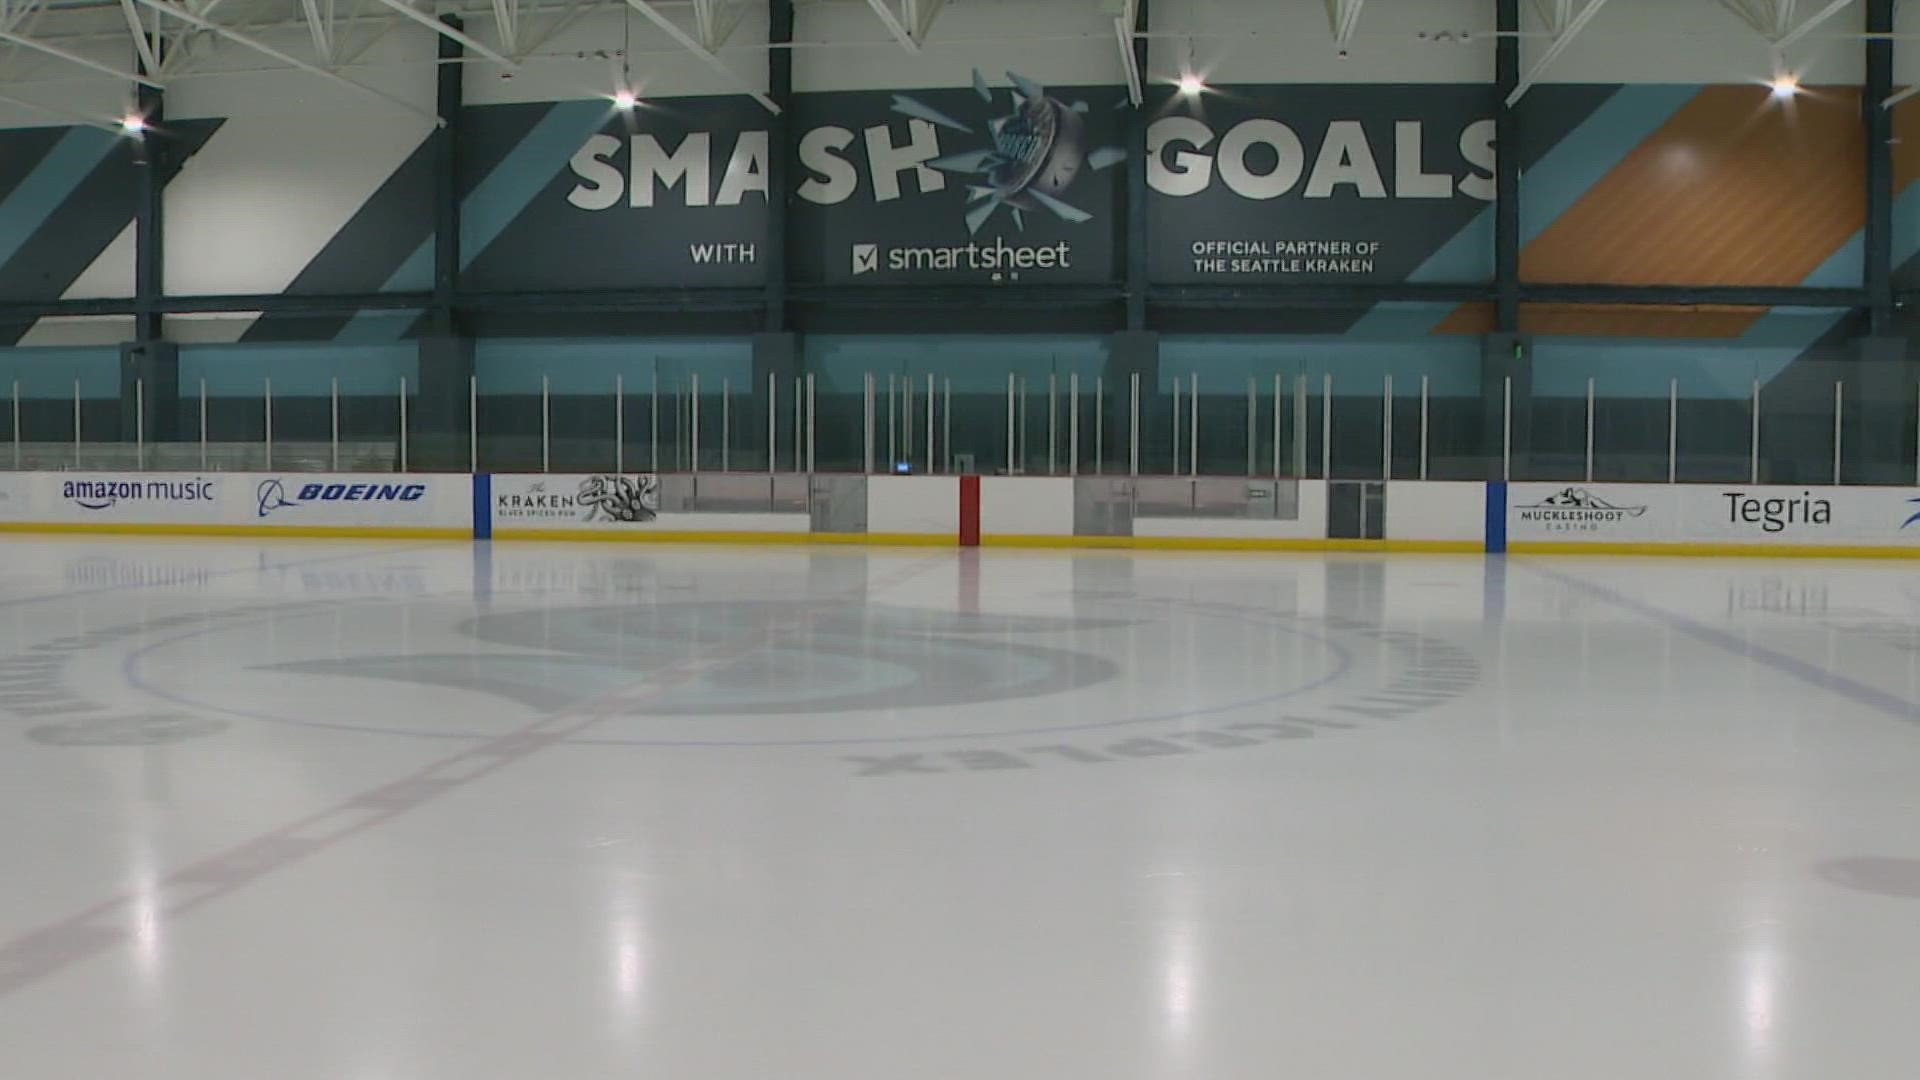 Kraken officials said before this facility there wasn’t an ice rink within Seattle for 40 years.